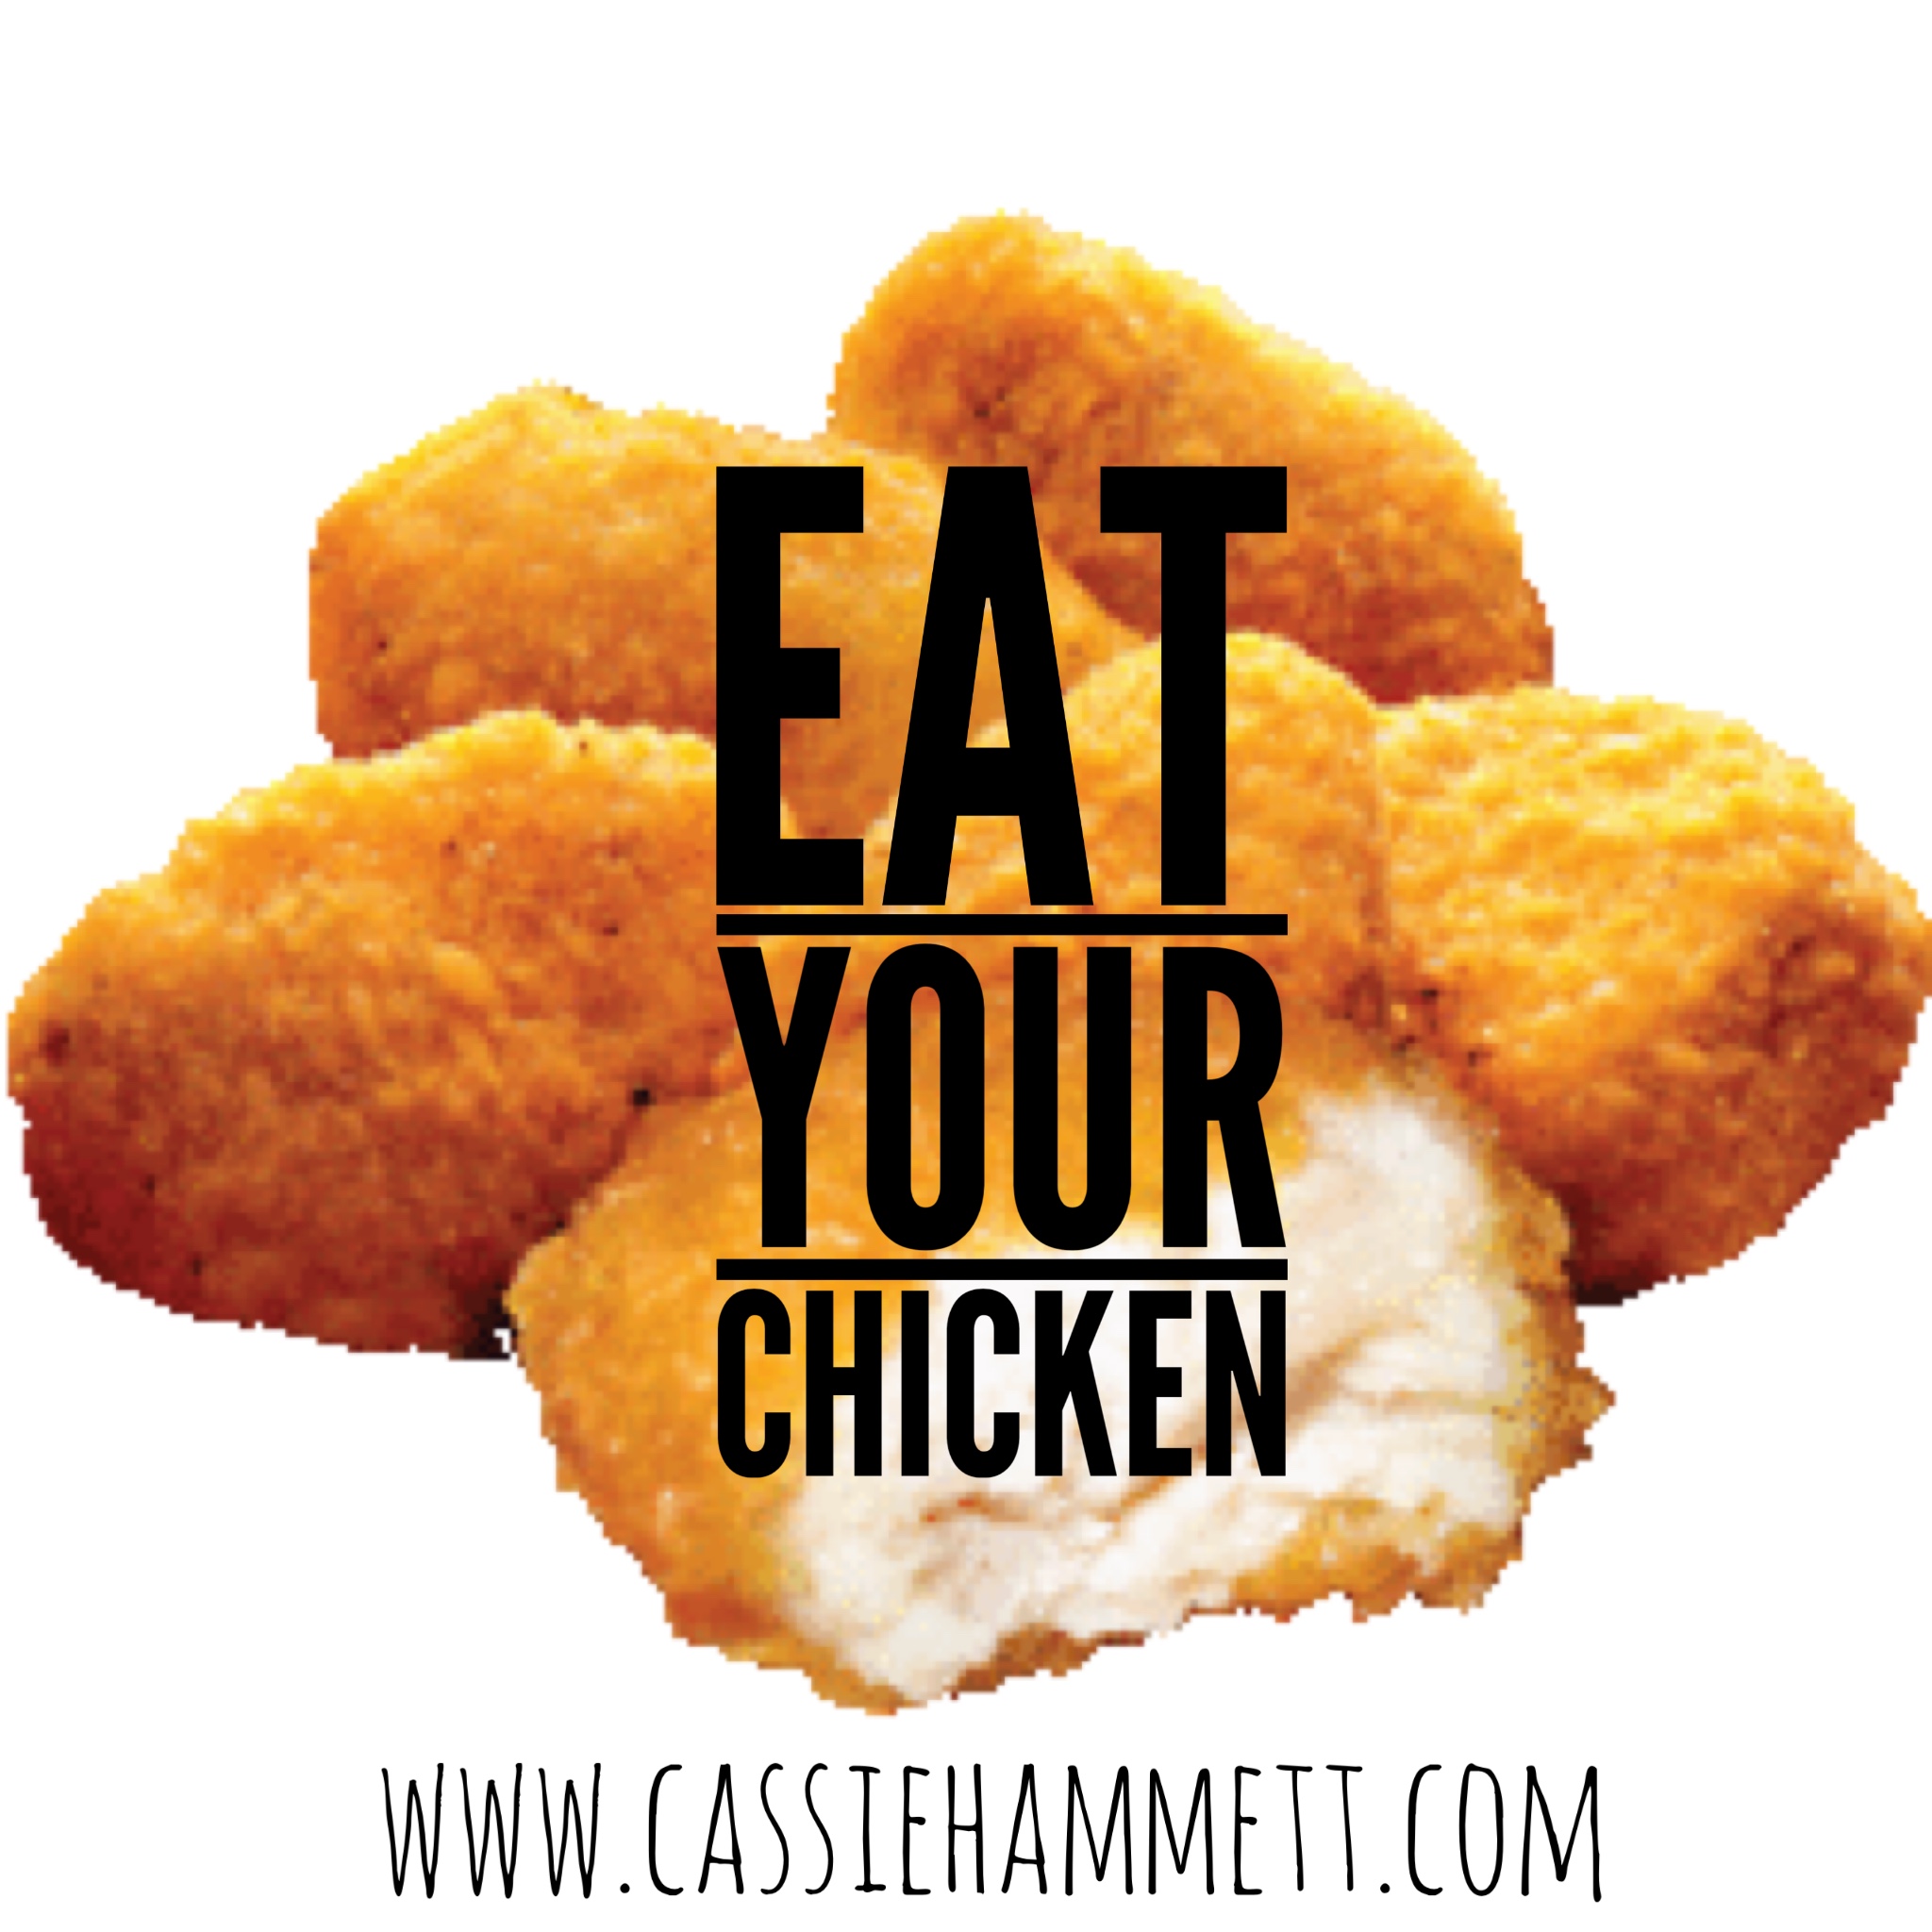 EAT YOUR CHICKEN